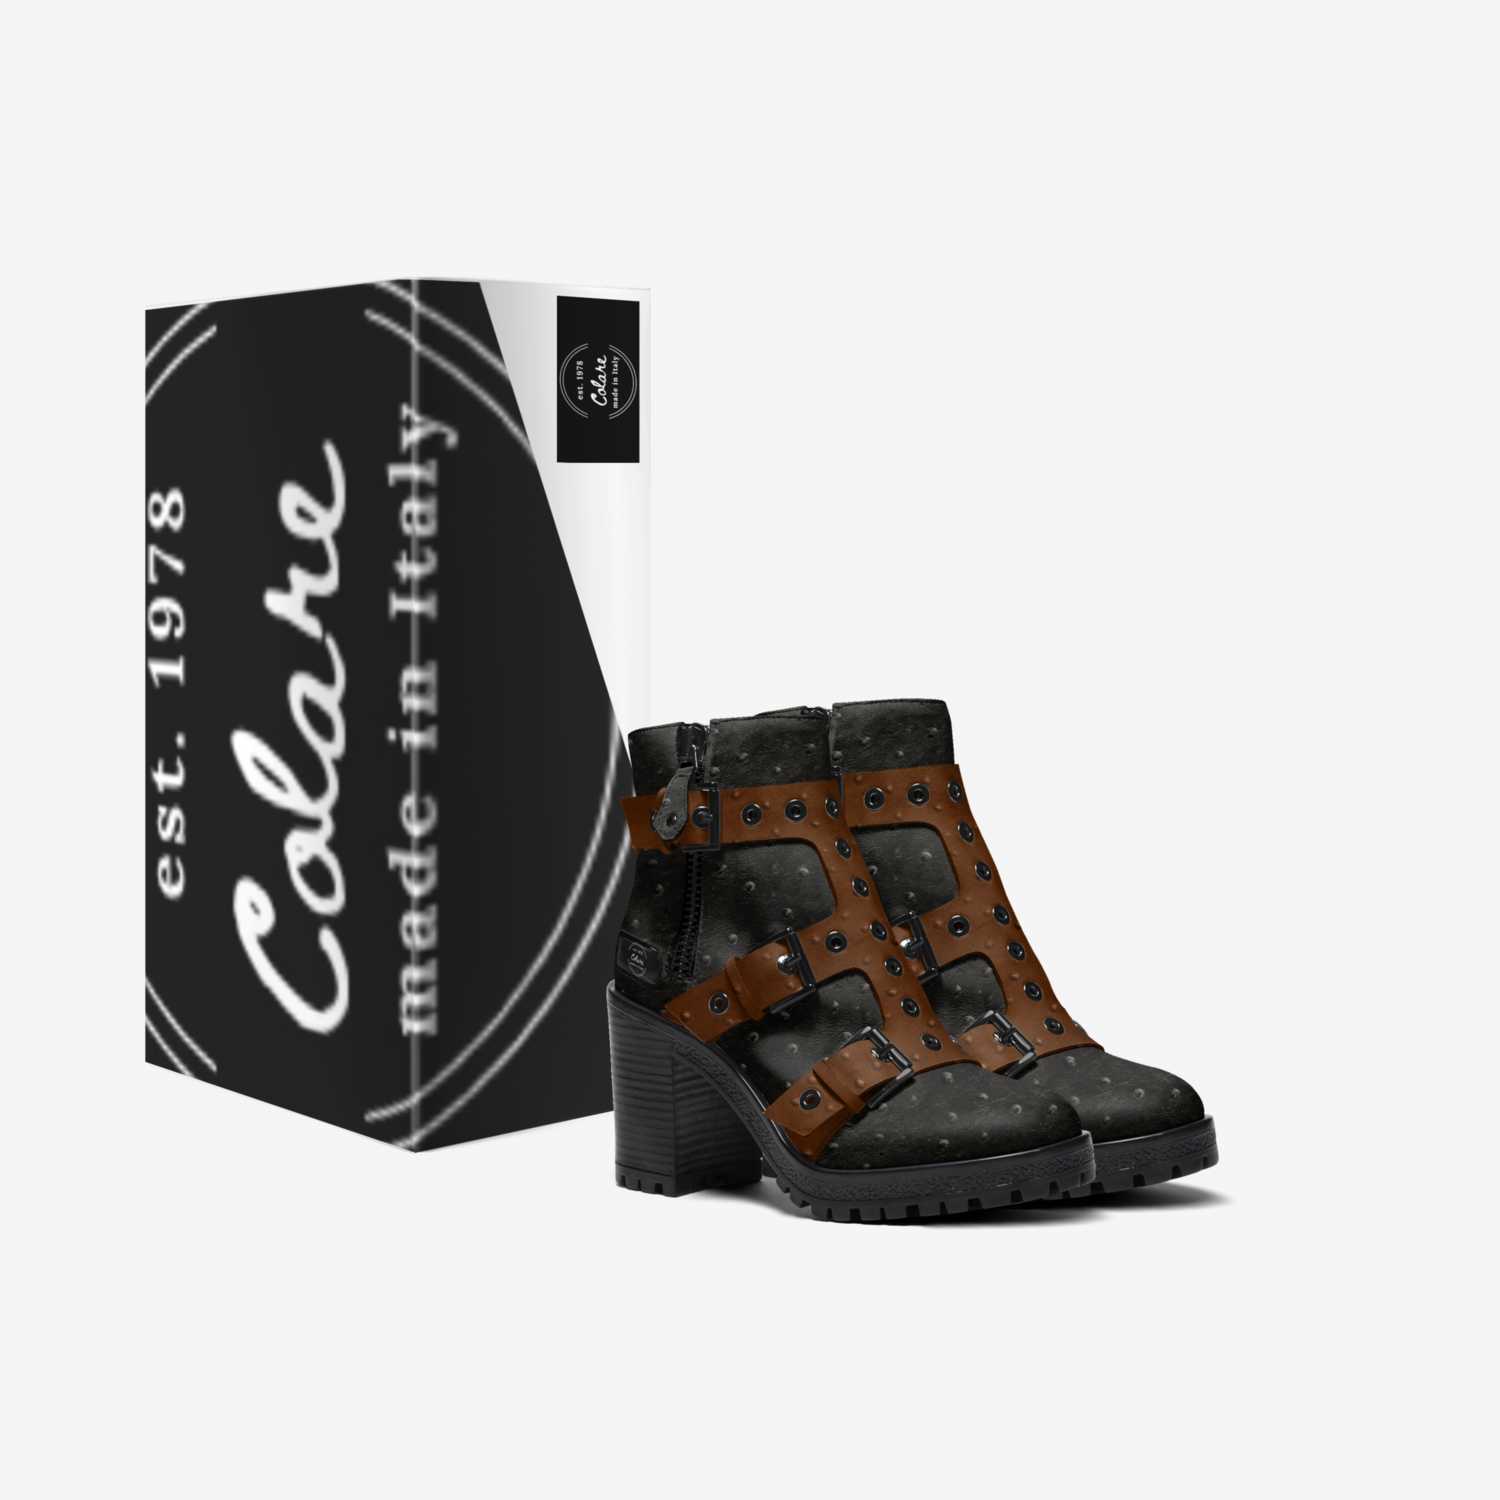 COLARE custom made in Italy shoes by Colare . | Box view